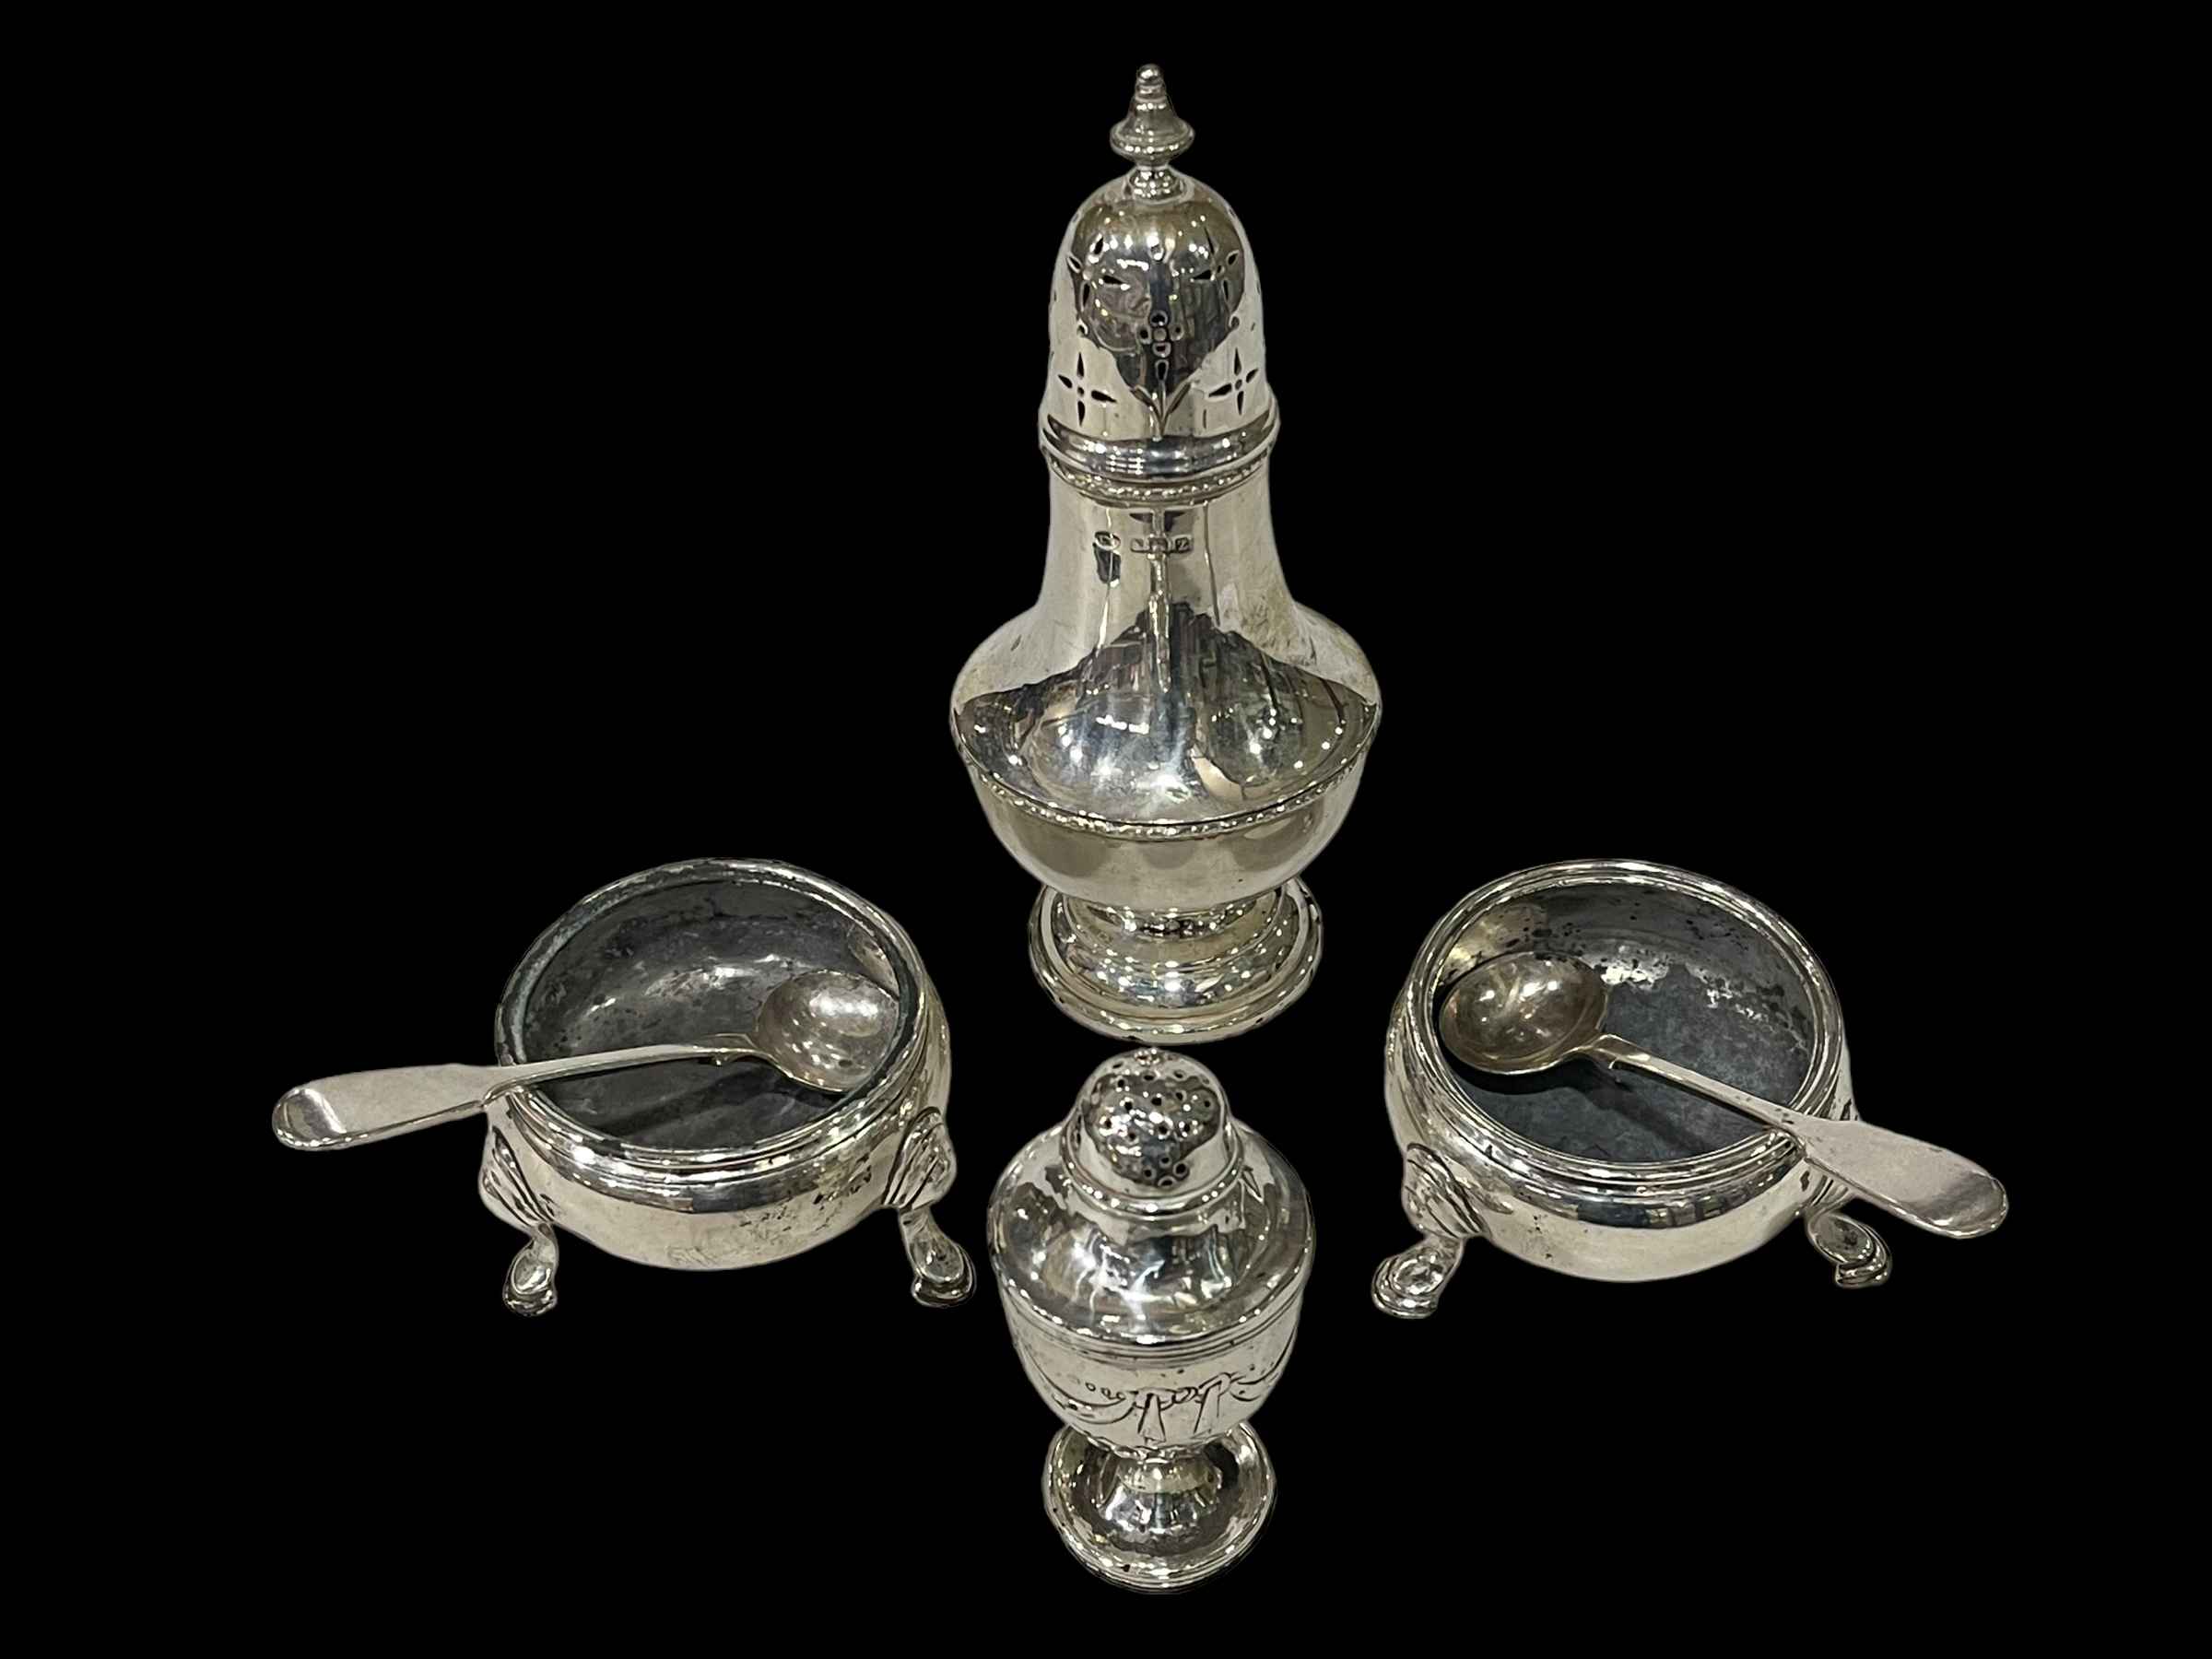 Pair of George II silver cauldron salts and silver plated spoon, Victorian urn shaped pepperette,